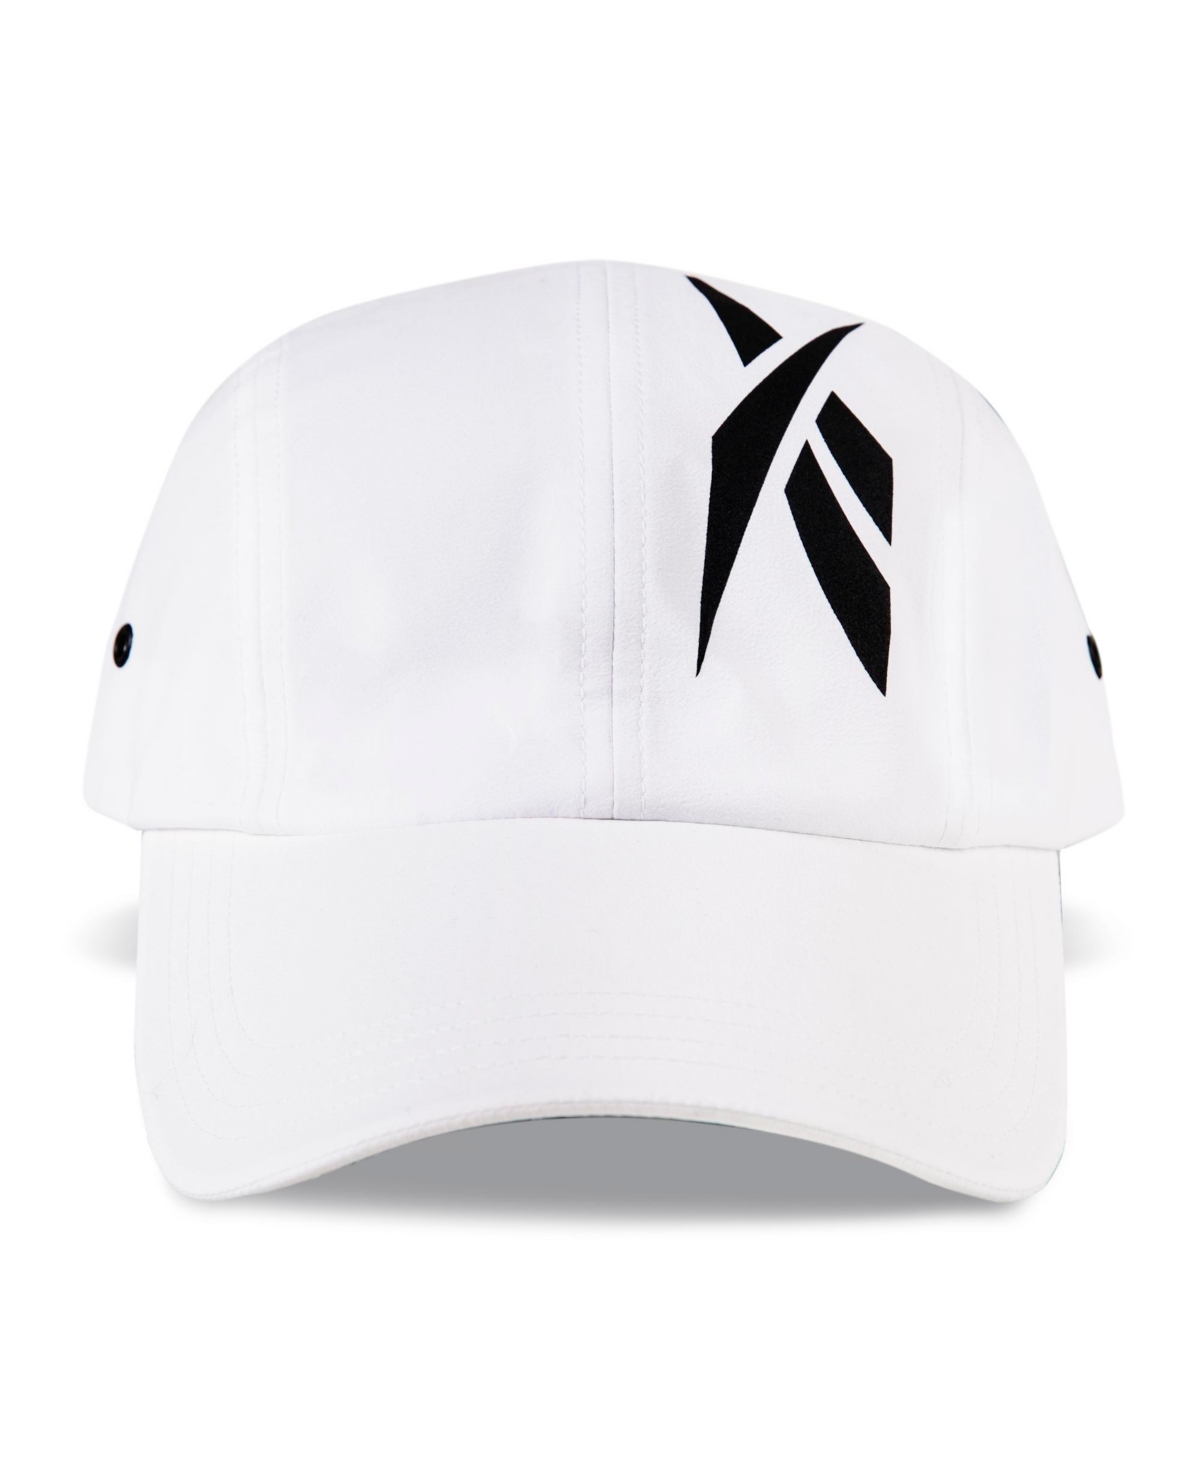 Reebok Men's Technical Running Cap With Drawcord In White